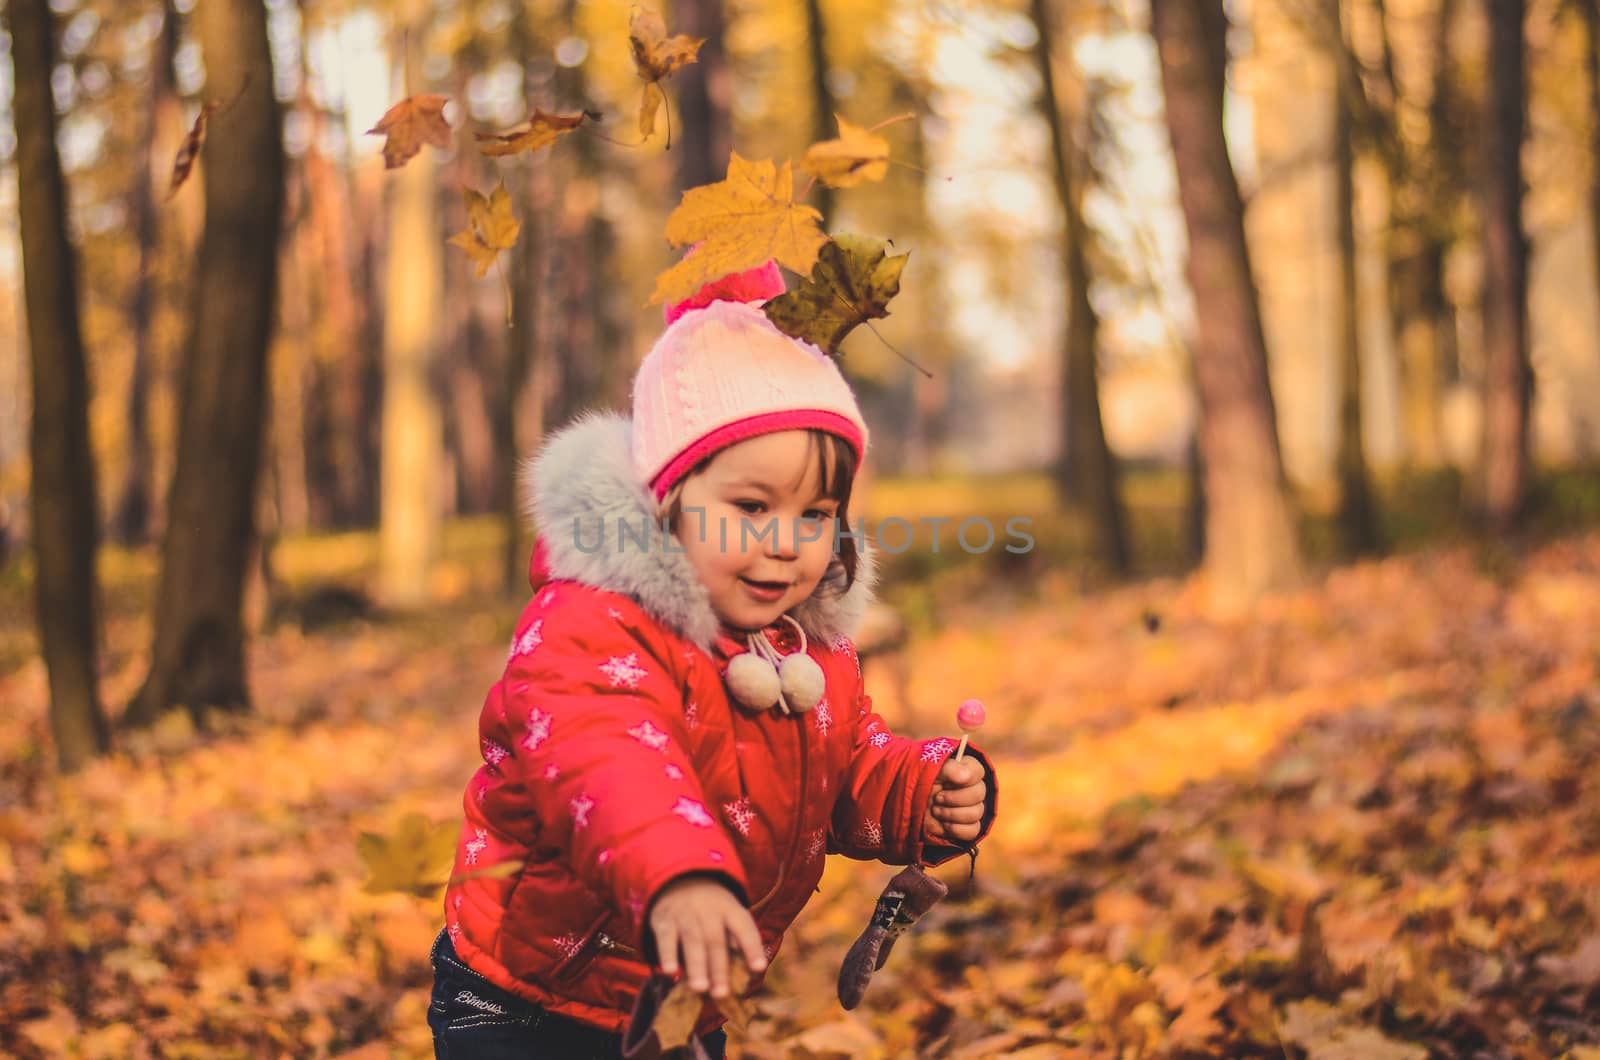 Pretty girl playing with yellow leaves in the autumn forest by chernobrovin